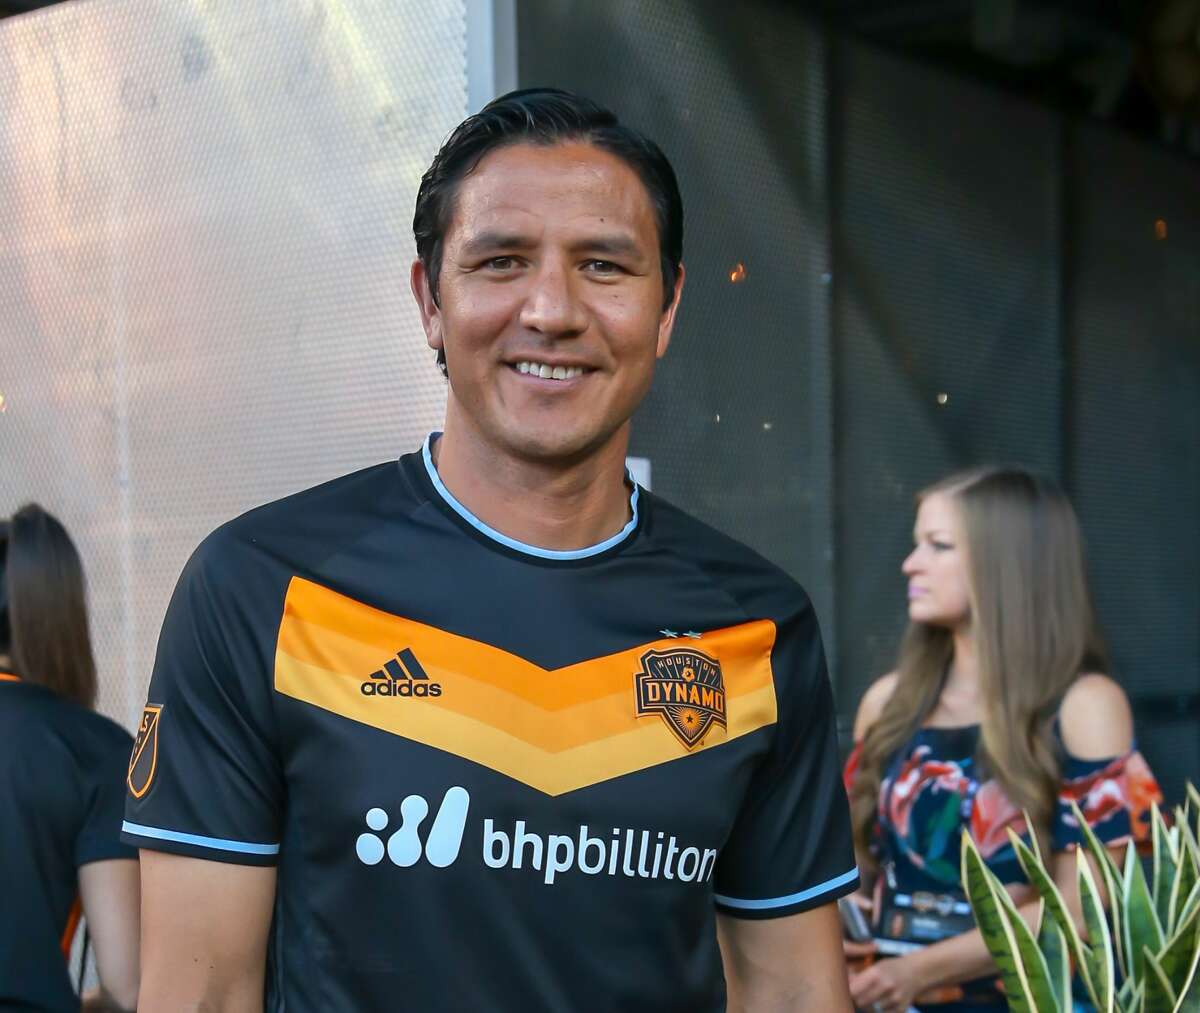 May 5, 2018: Former Houston Dynamo player Brian Ching visits with fans during the MLS soccer match between the LA Galaxy and Houston Dynamo at BBVA Compass Stadium in Houston, Texas. (Leslie Plaza Johnson/Freelance